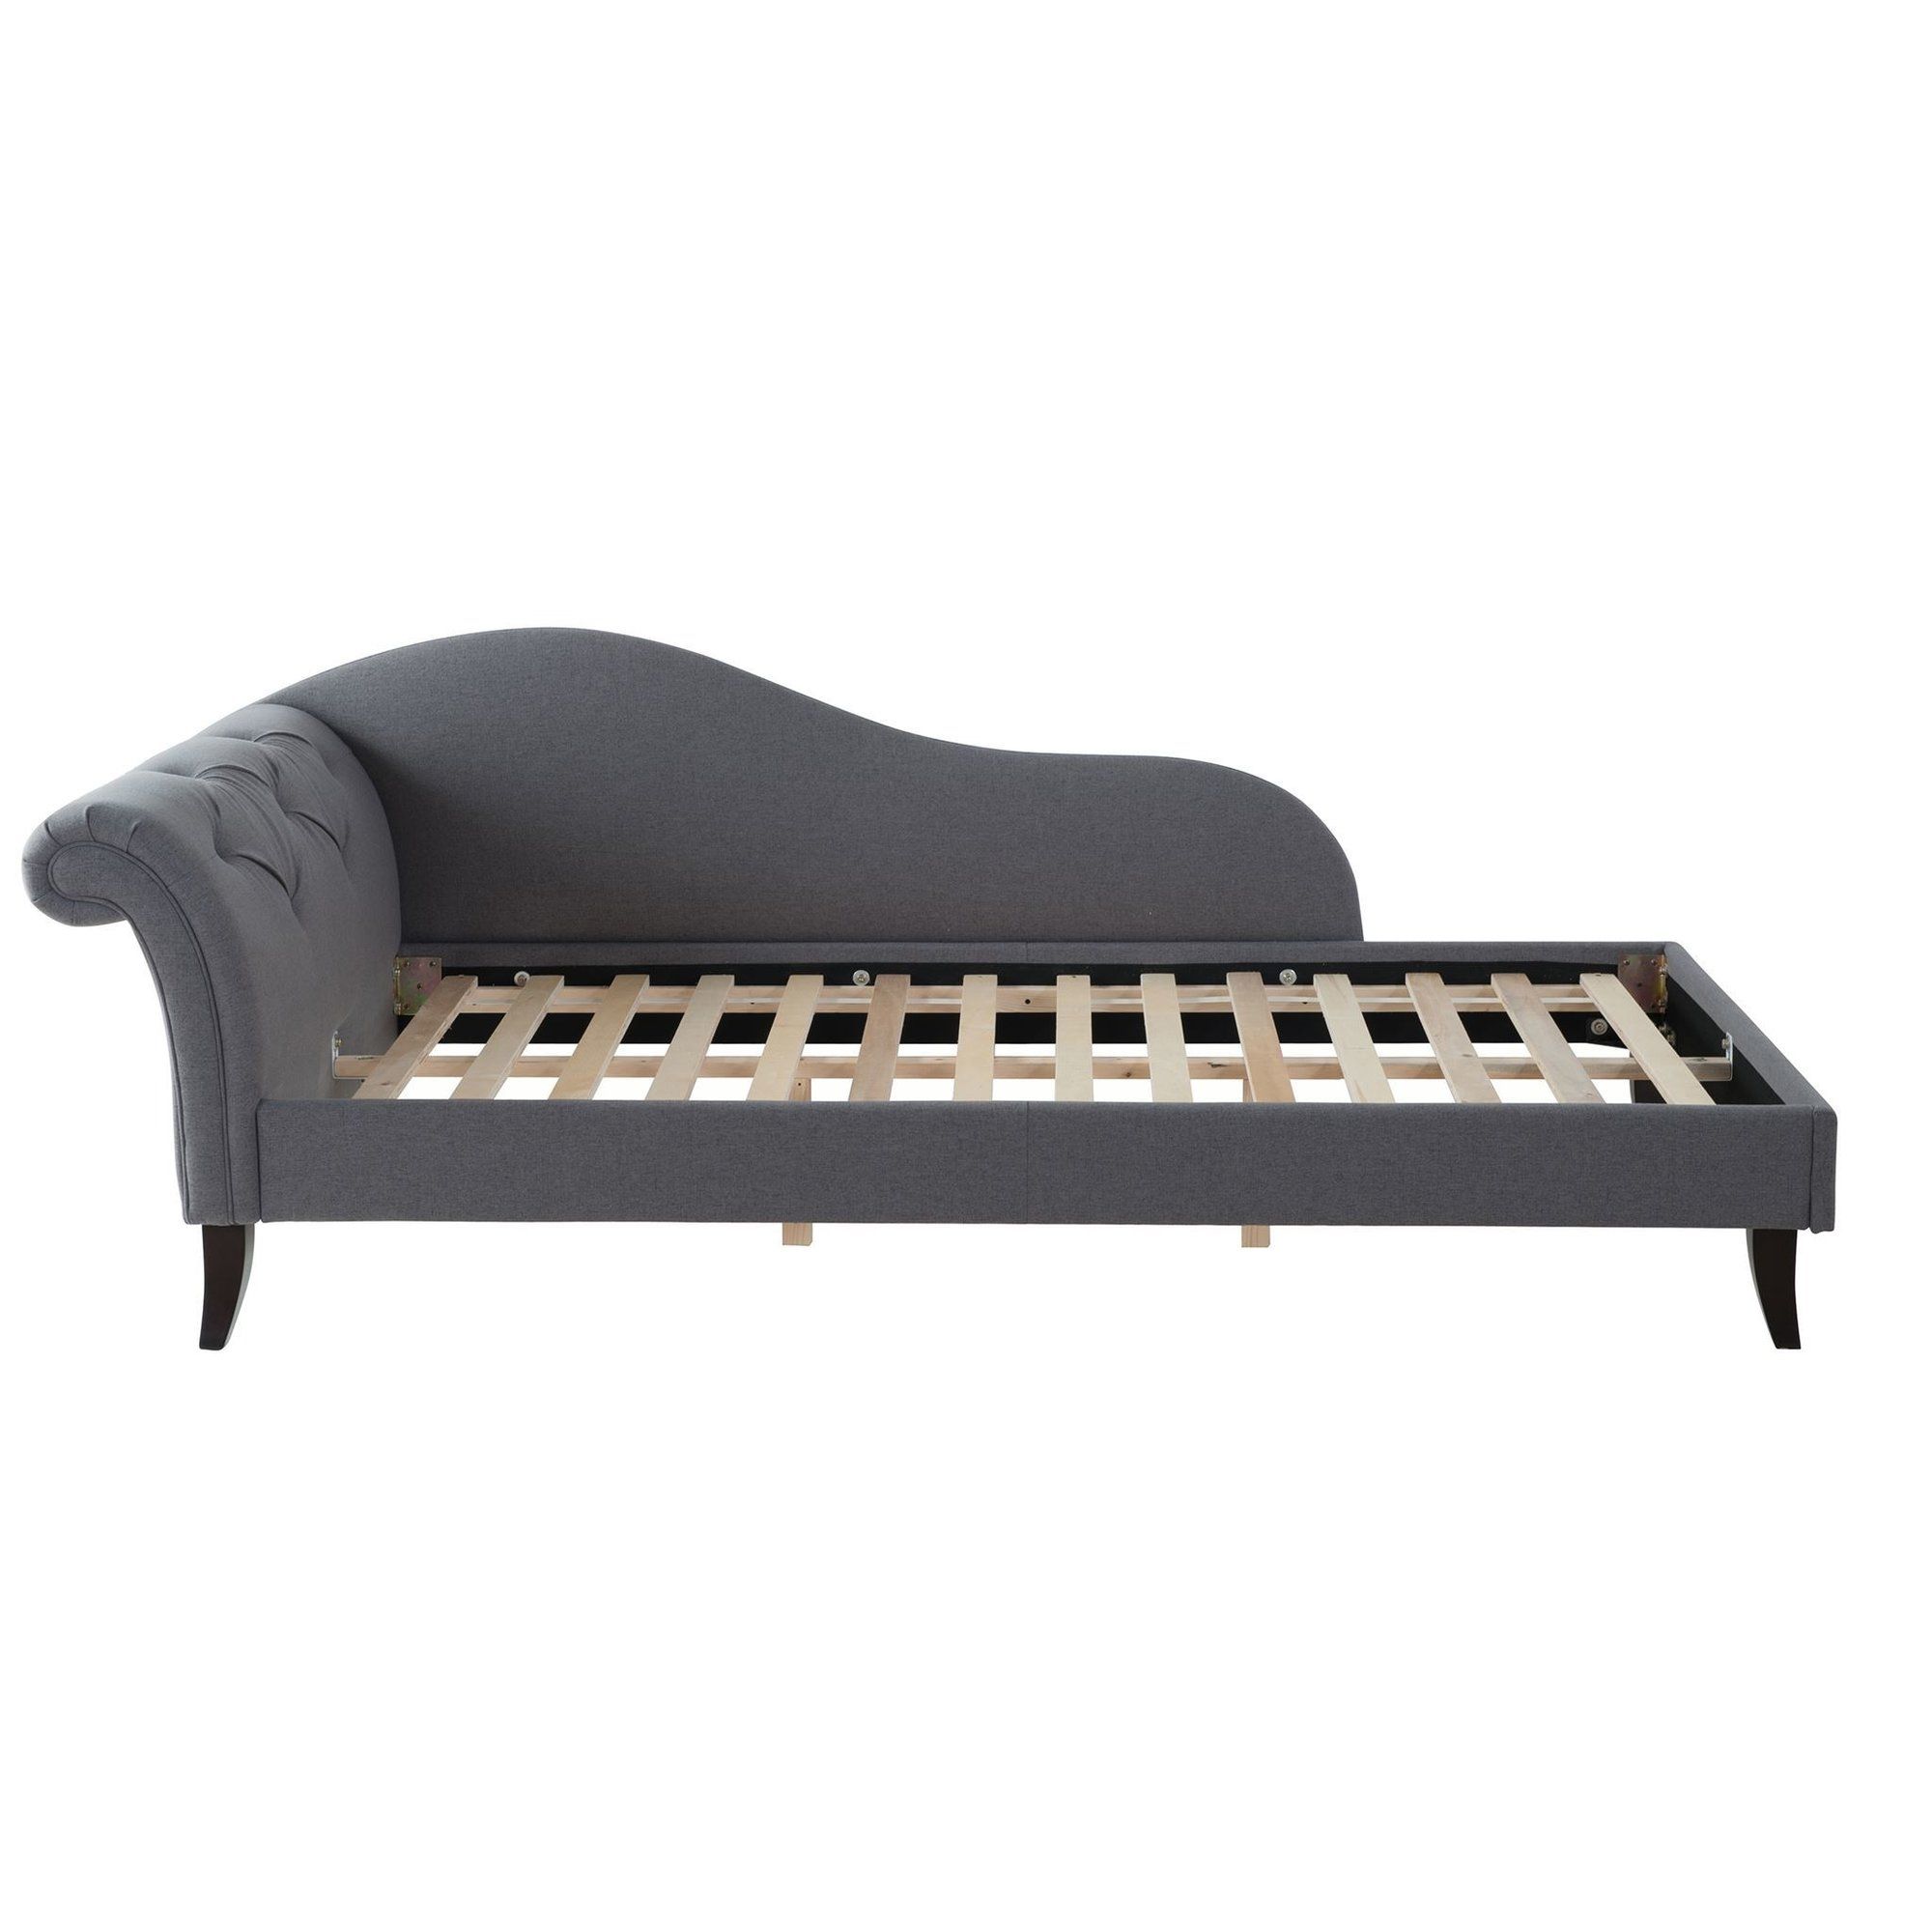 Mercer41 Reede Tiffany Chaise Sofa Reviews Wayfair For Backless Chaise Sofa (View 11 of 12)